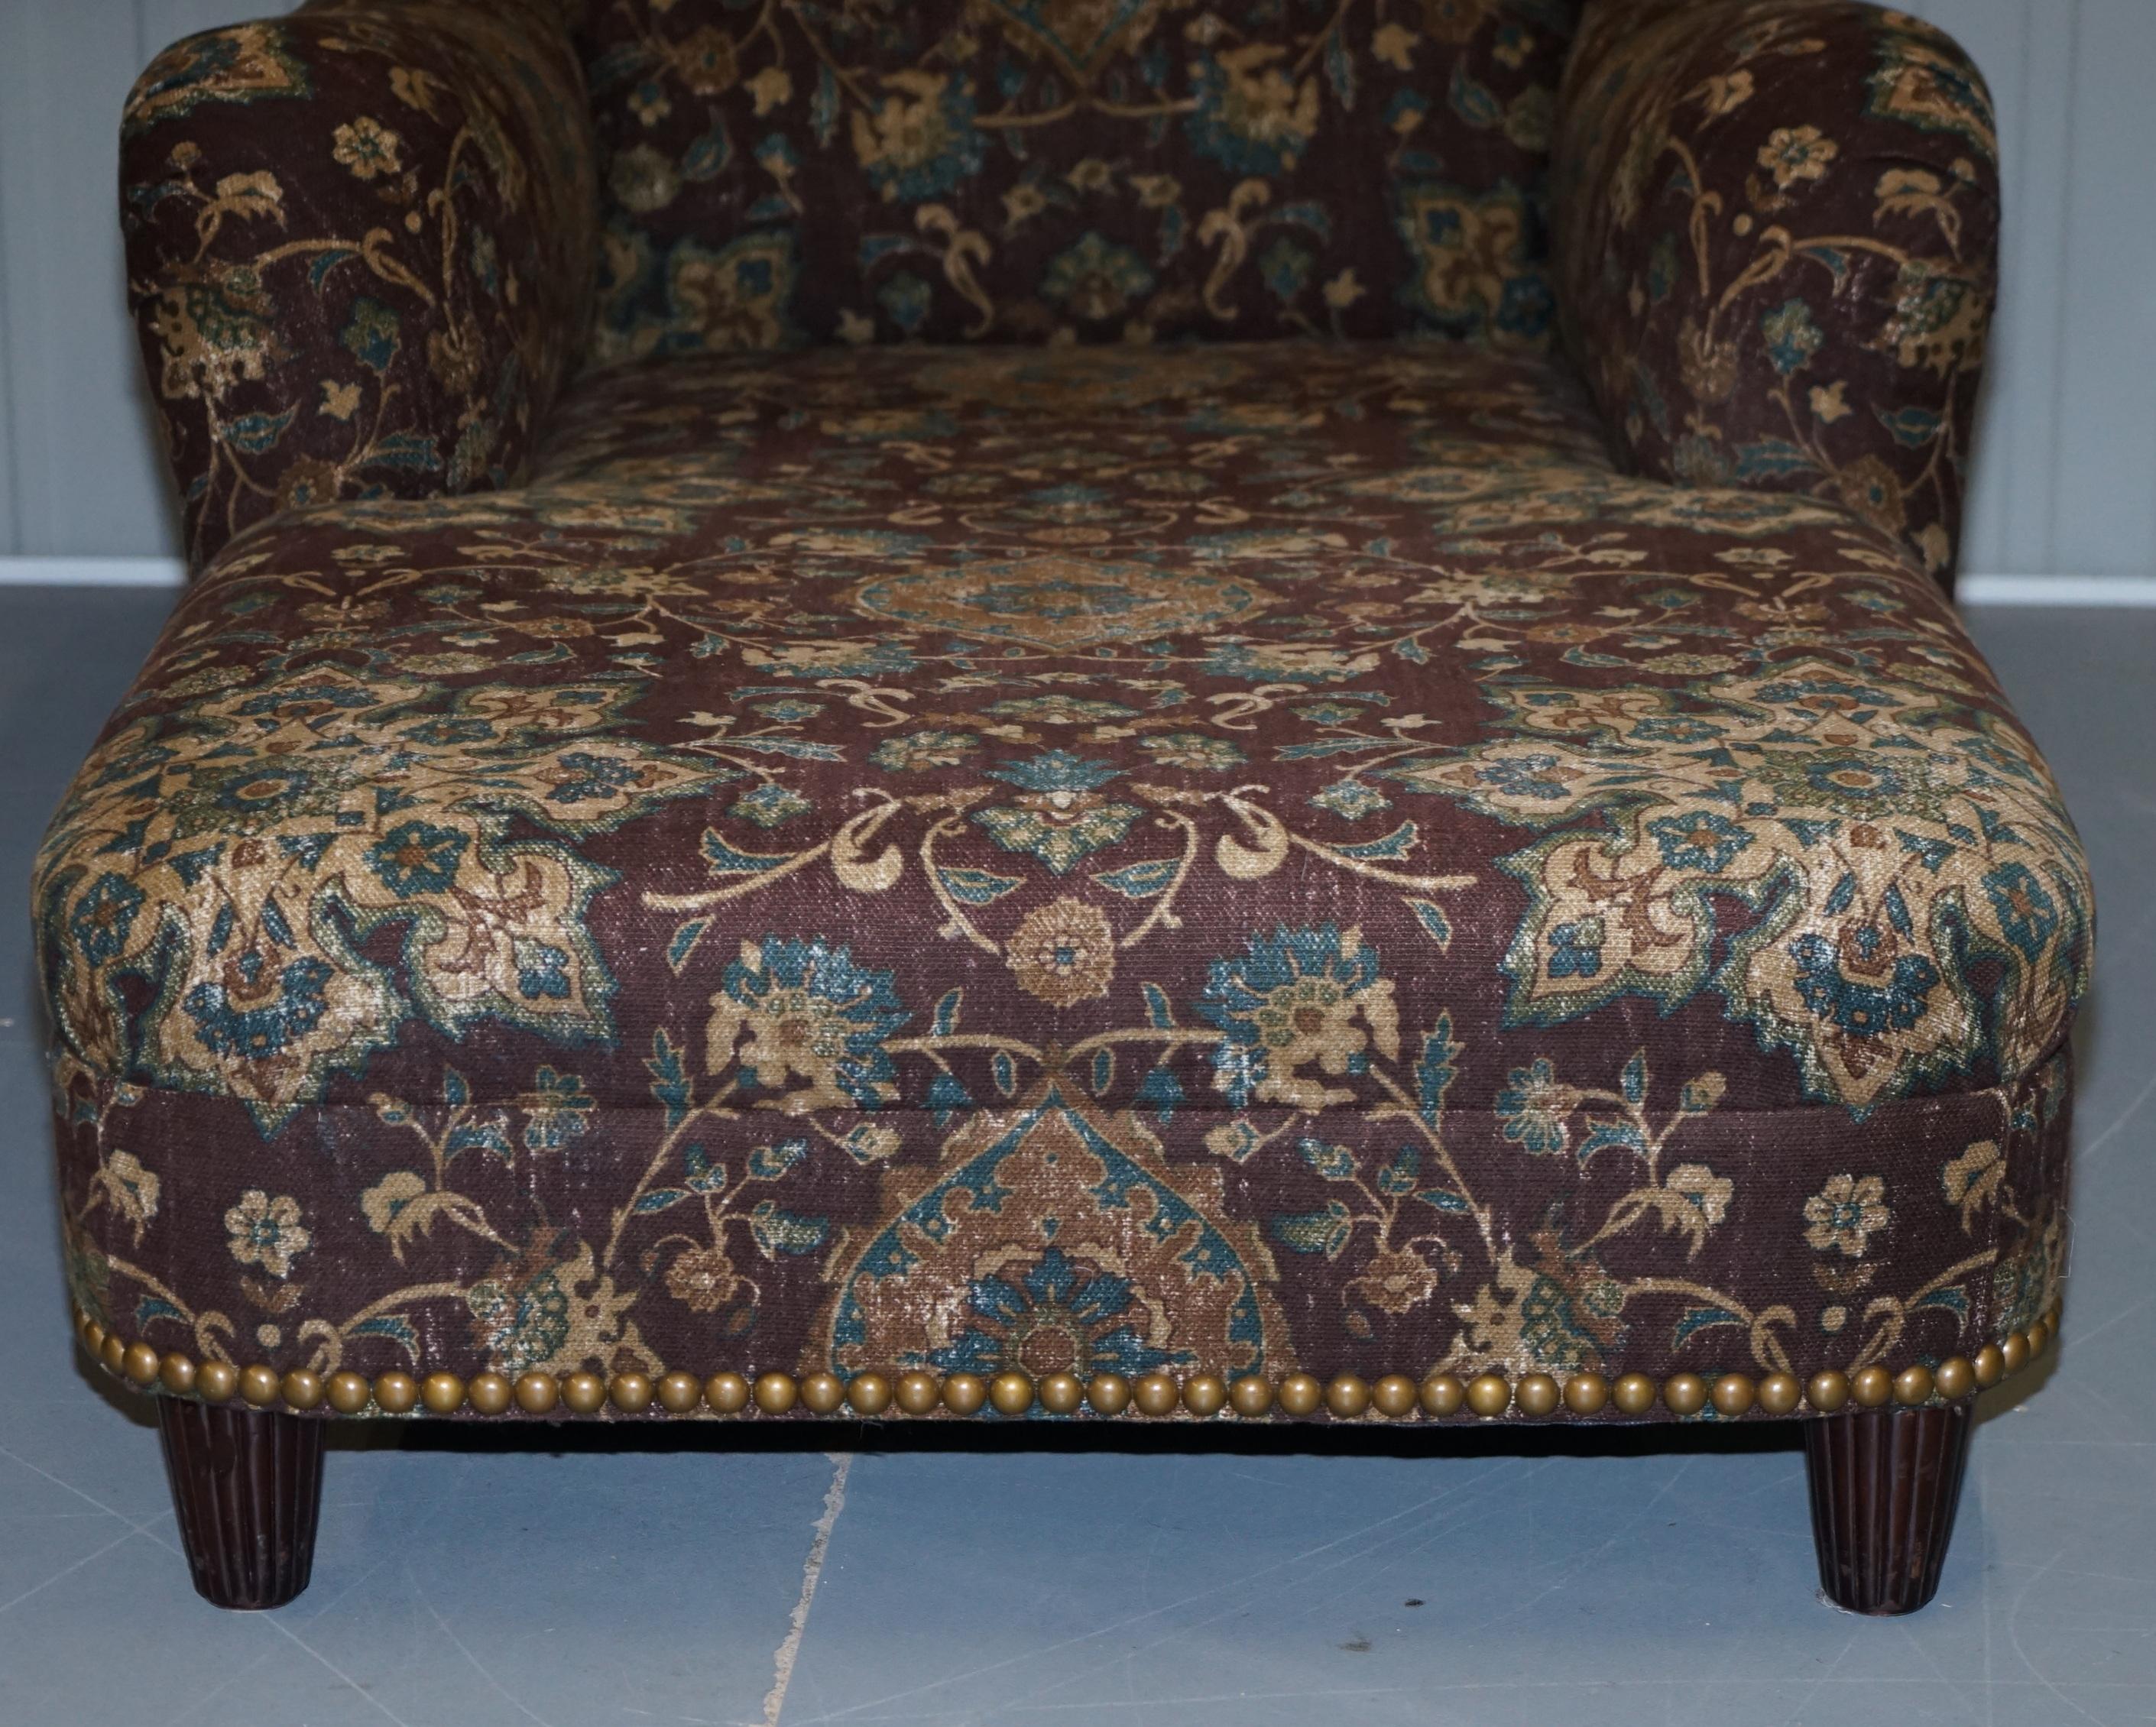 Large Oversized Ralph Lauren Chaise Lounge Sofa Armchair Floral Upholstery 4